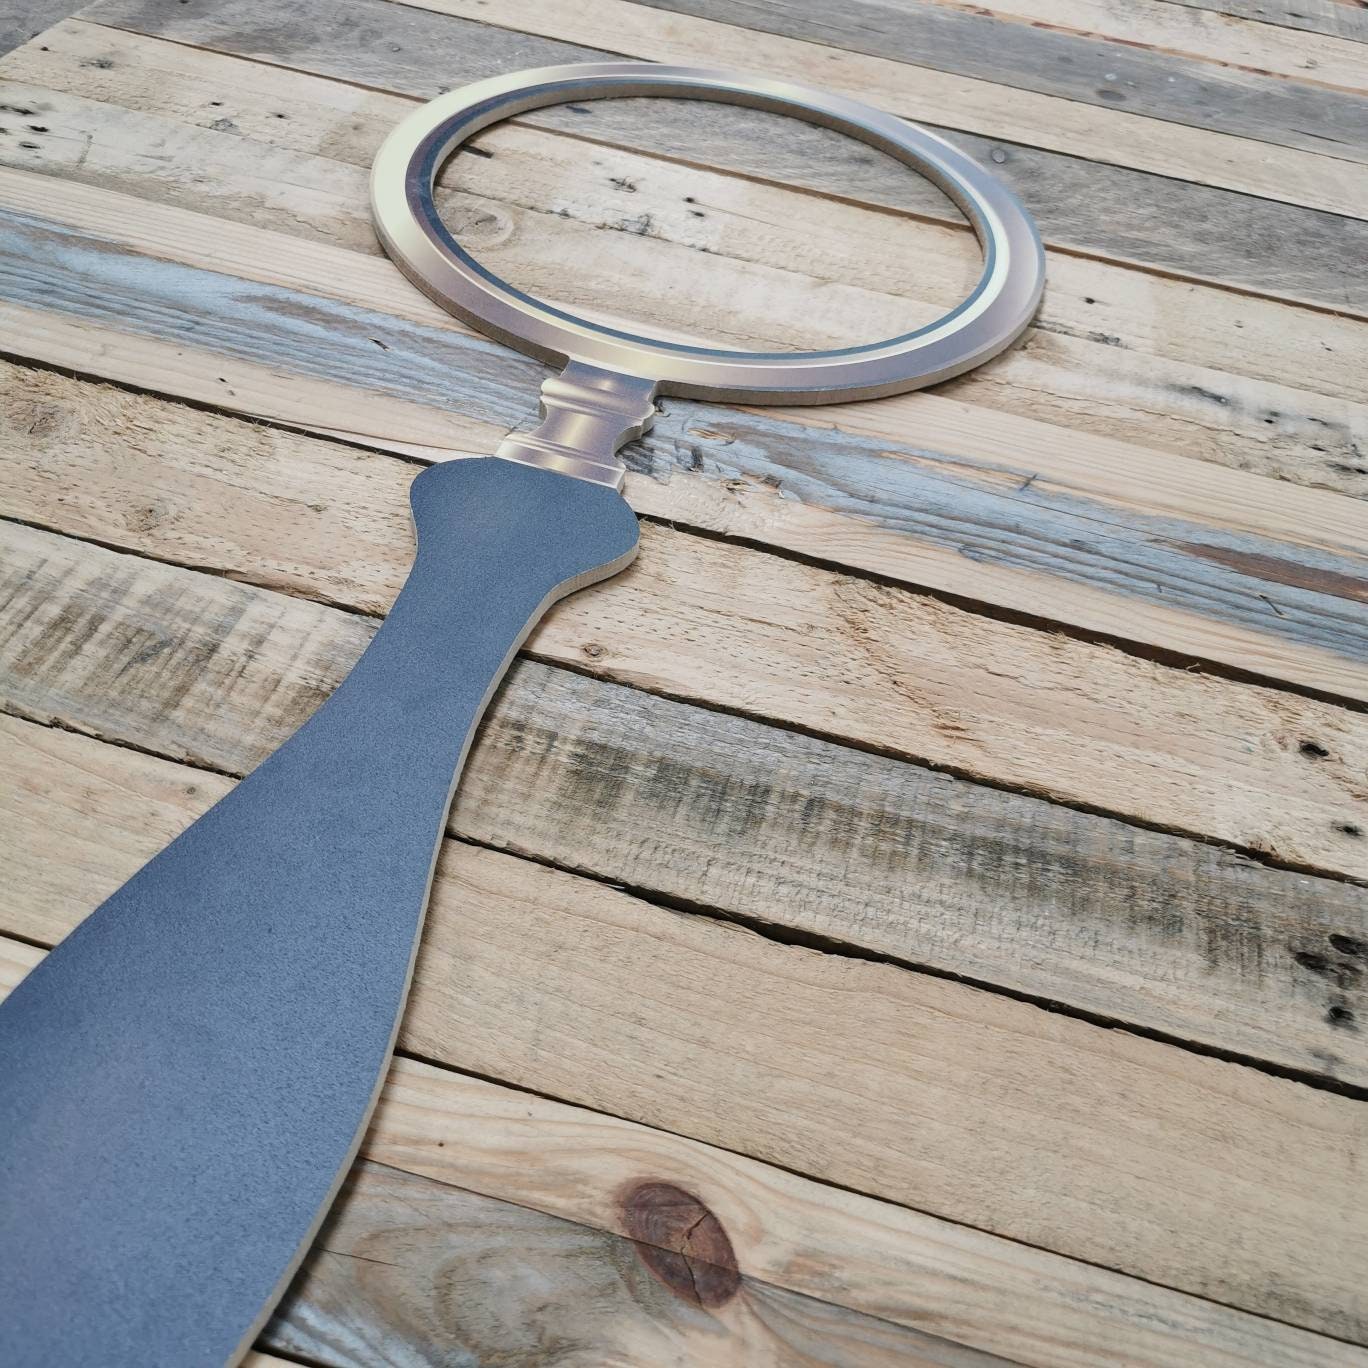 Giant Magnifying Glass Prop